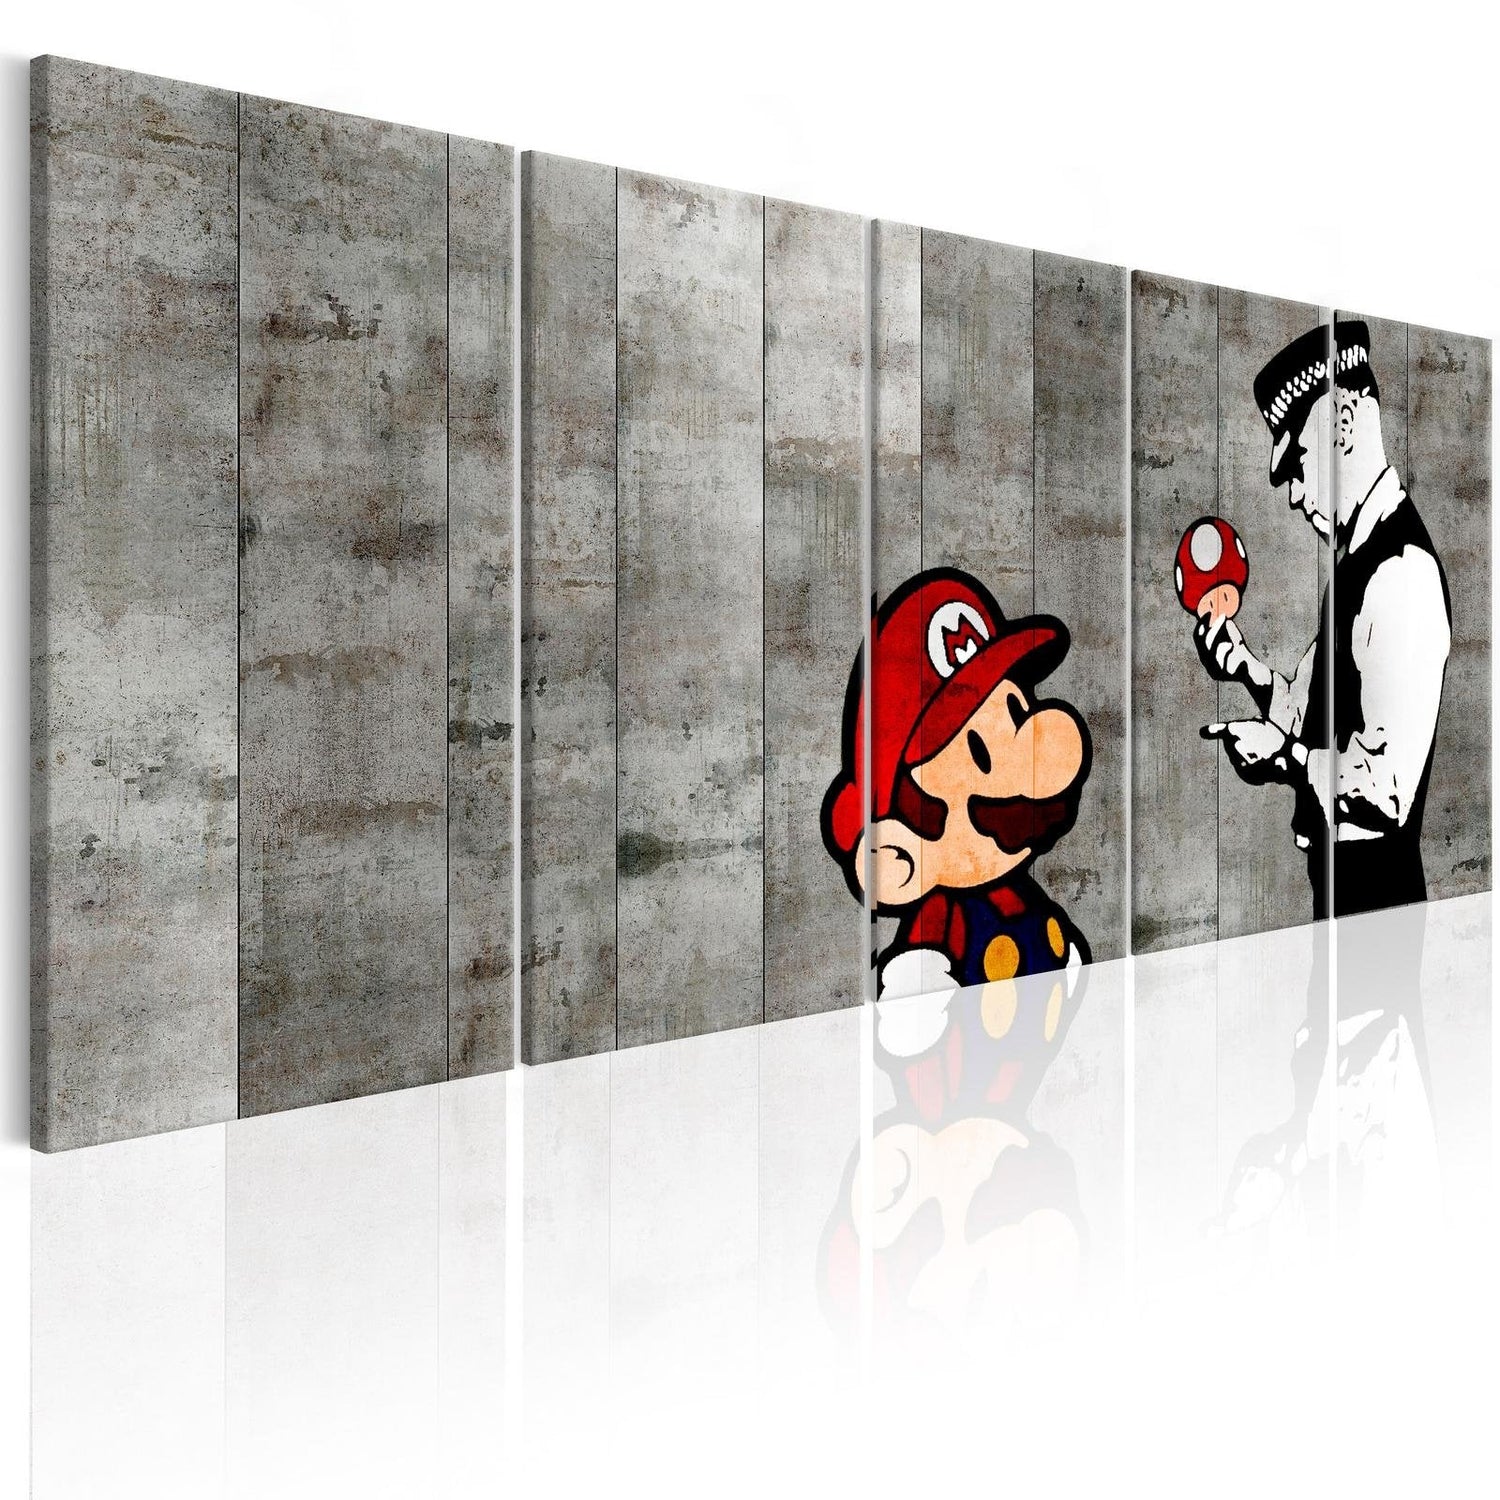 Stretched Canvas Street Art - Banksy: Mario On Concrete Wall 5 Piece-Tiptophomedecor